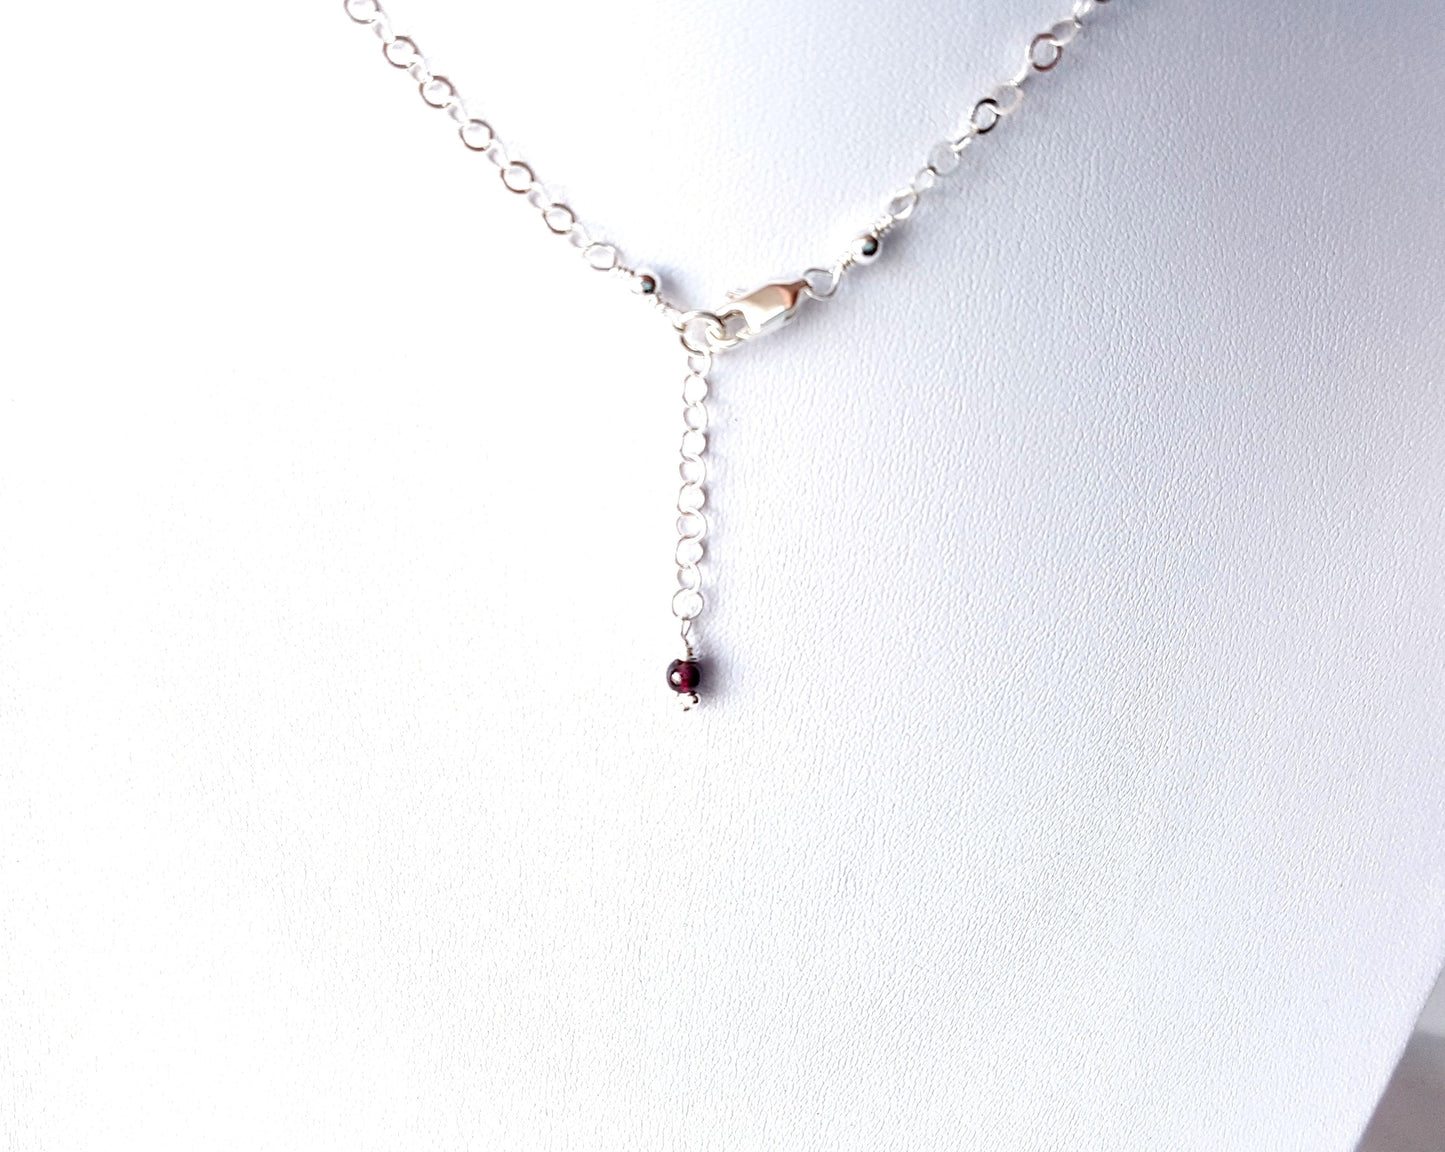 Garnet Passion Necklace, Handmade Sterling Silver Genuine Garnet Bib or Fringe Style Necklace, Back of necklace, clasp and Extension chain